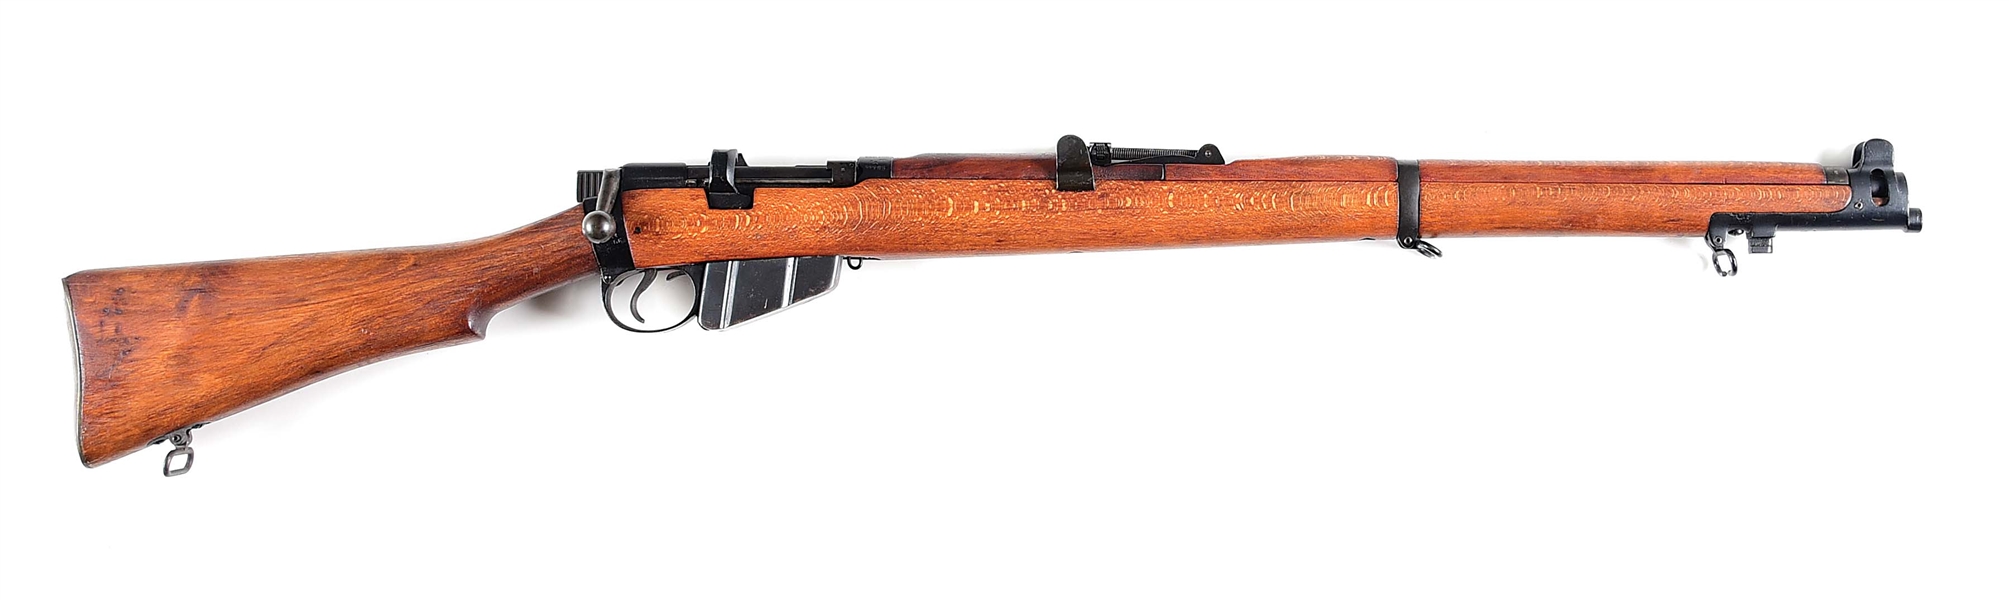 (C) LATE BSA DISPERSAL MK III .303 BOLT ACTION RIFLE WITH 1944 RECEIVER DATE.